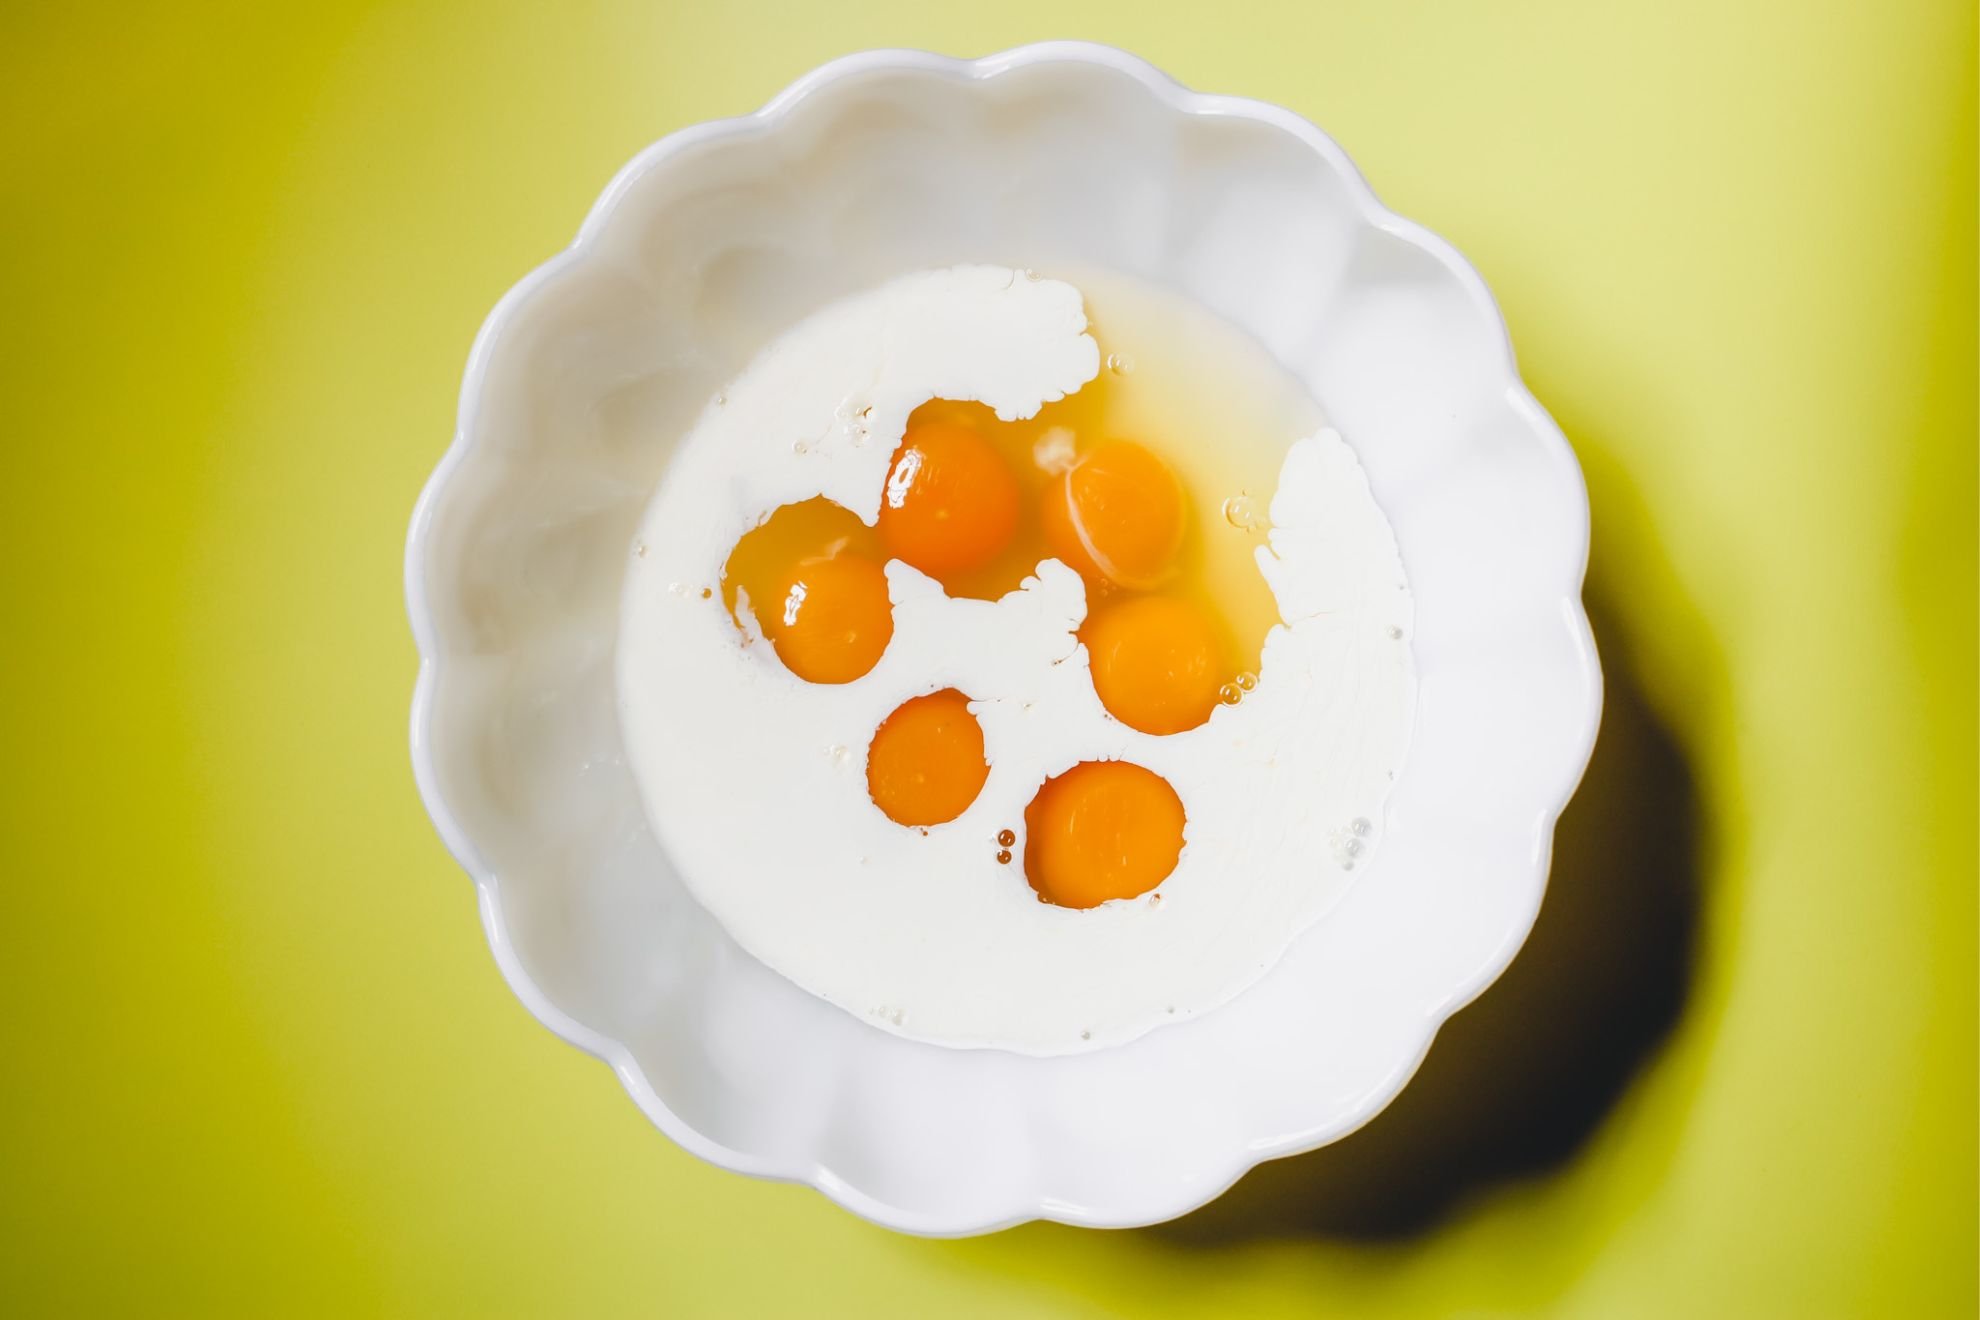 This is an overhead horizontal image of a large scalloped milk glass bowl on a yellow surface. In the bowl are six eggs and heavy cream.